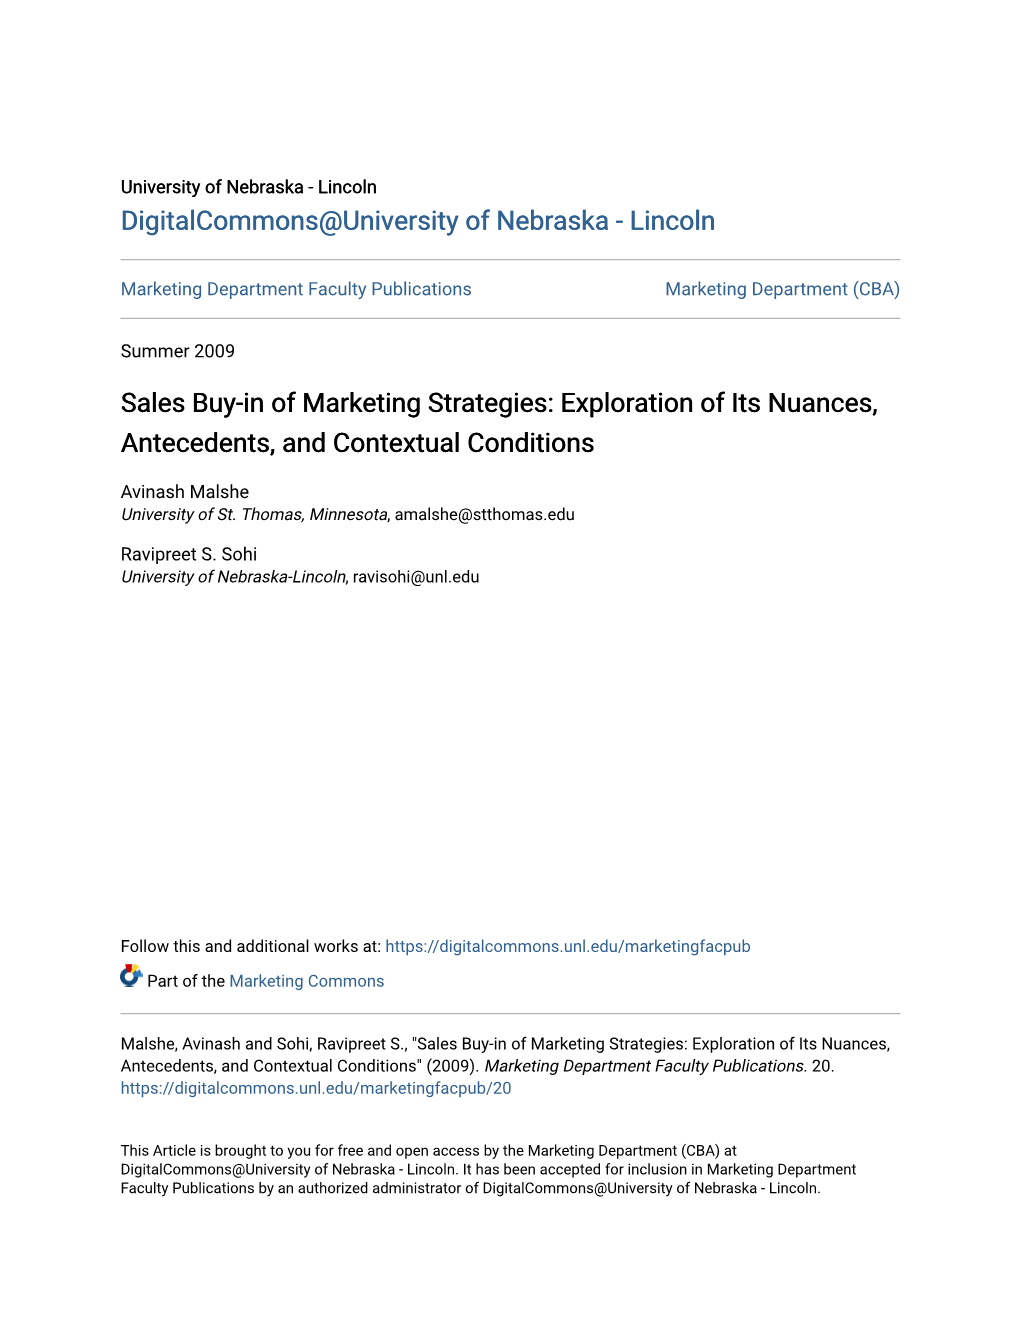 Sales Buy-In of Marketing Strategies: Exploration of Its Nuances, Antecedents, and Contextual Conditions